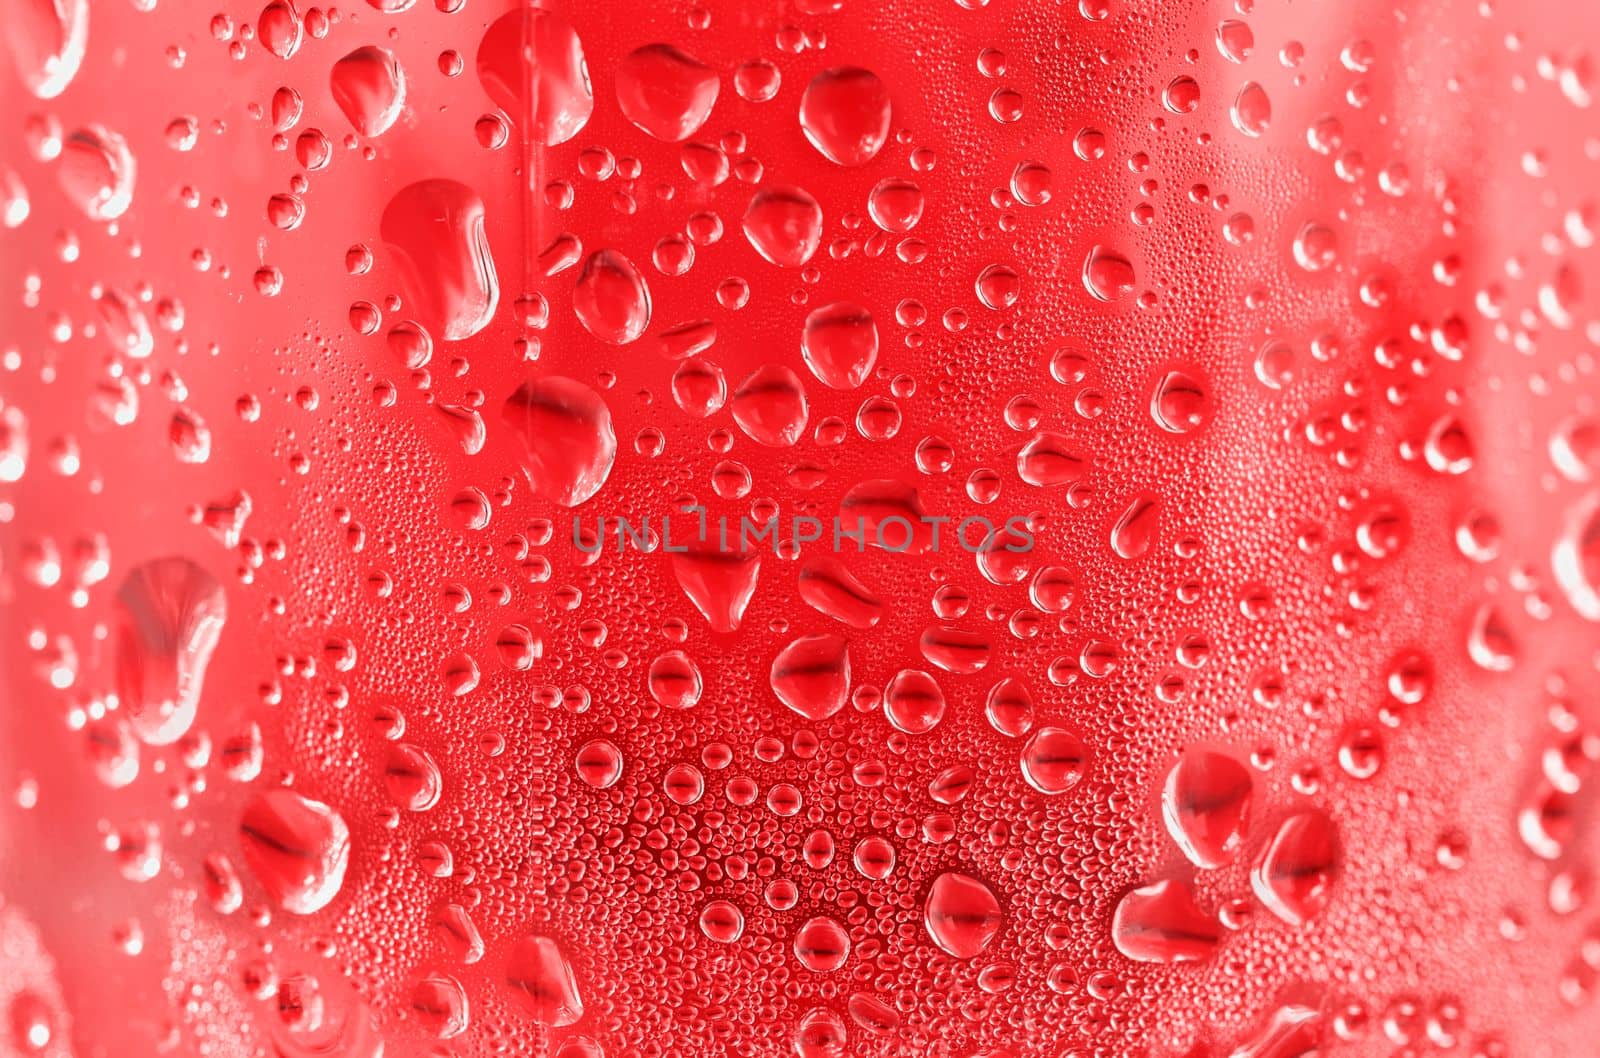 Red drops on glass ,full frame , background abstract